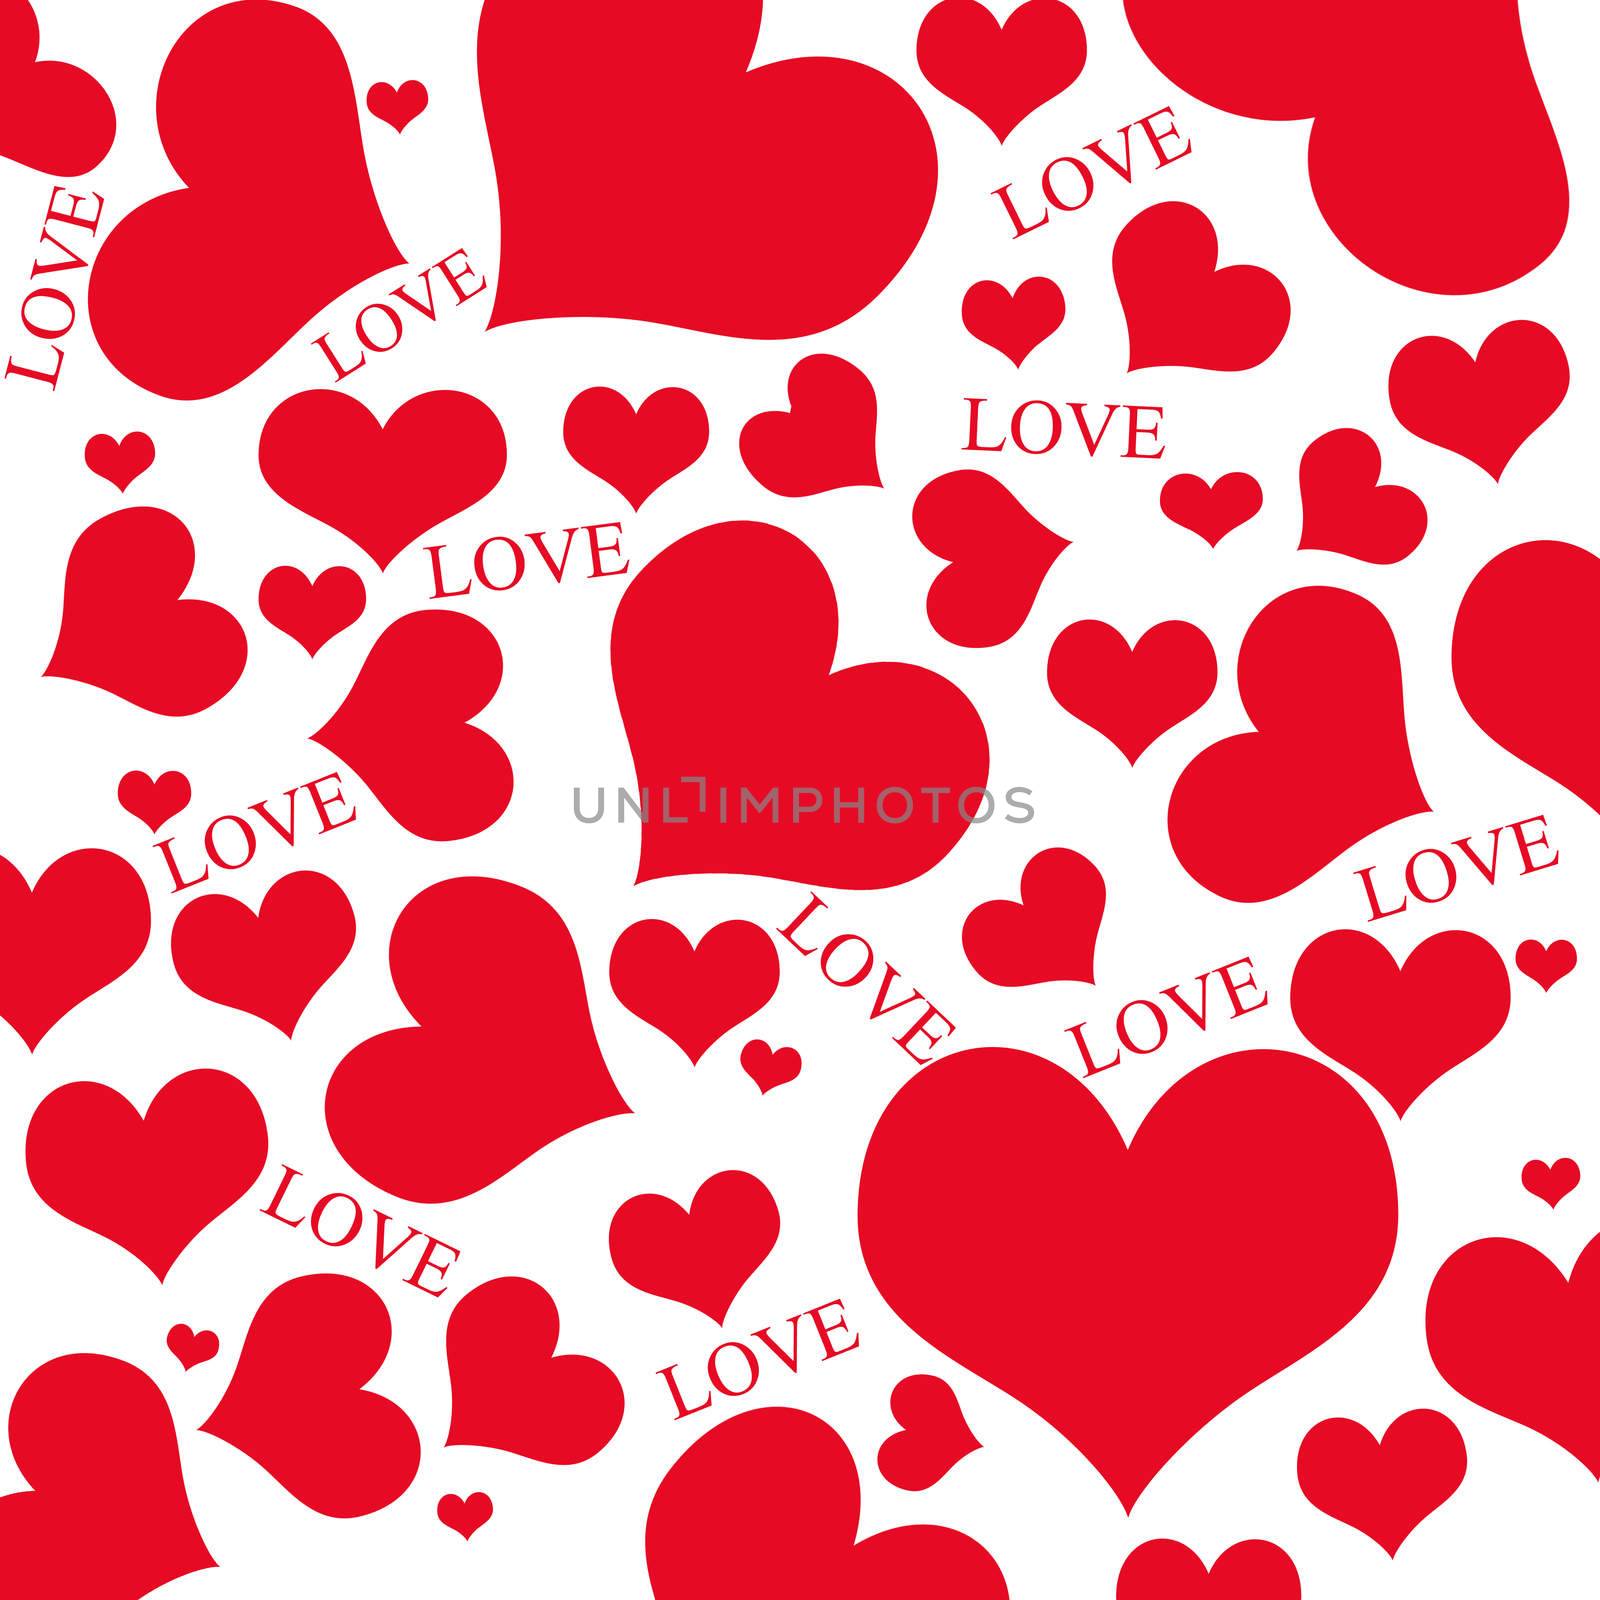 Red hearts and LOVE wording on the white background